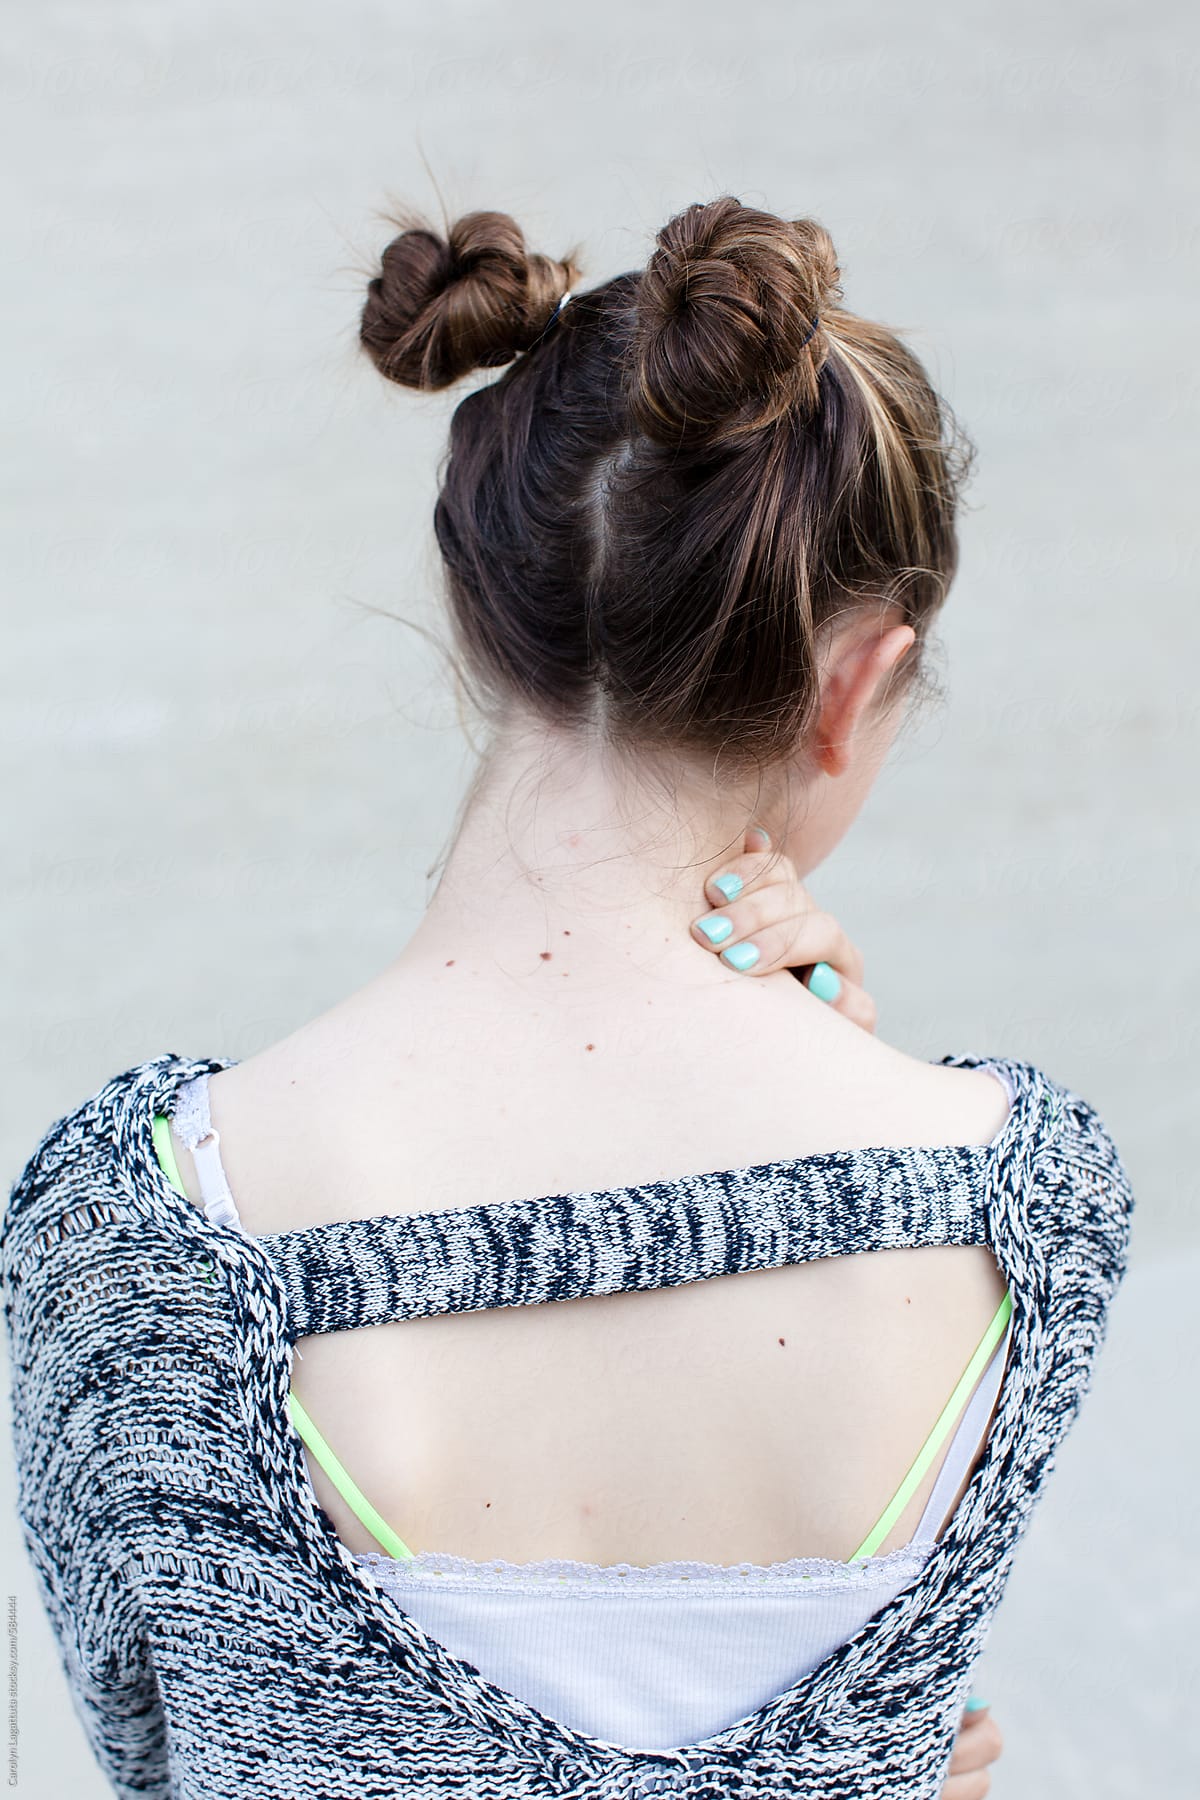 Back View Of A Teenage Girl With Buns In Her Hair By Carolyn Lagattuta